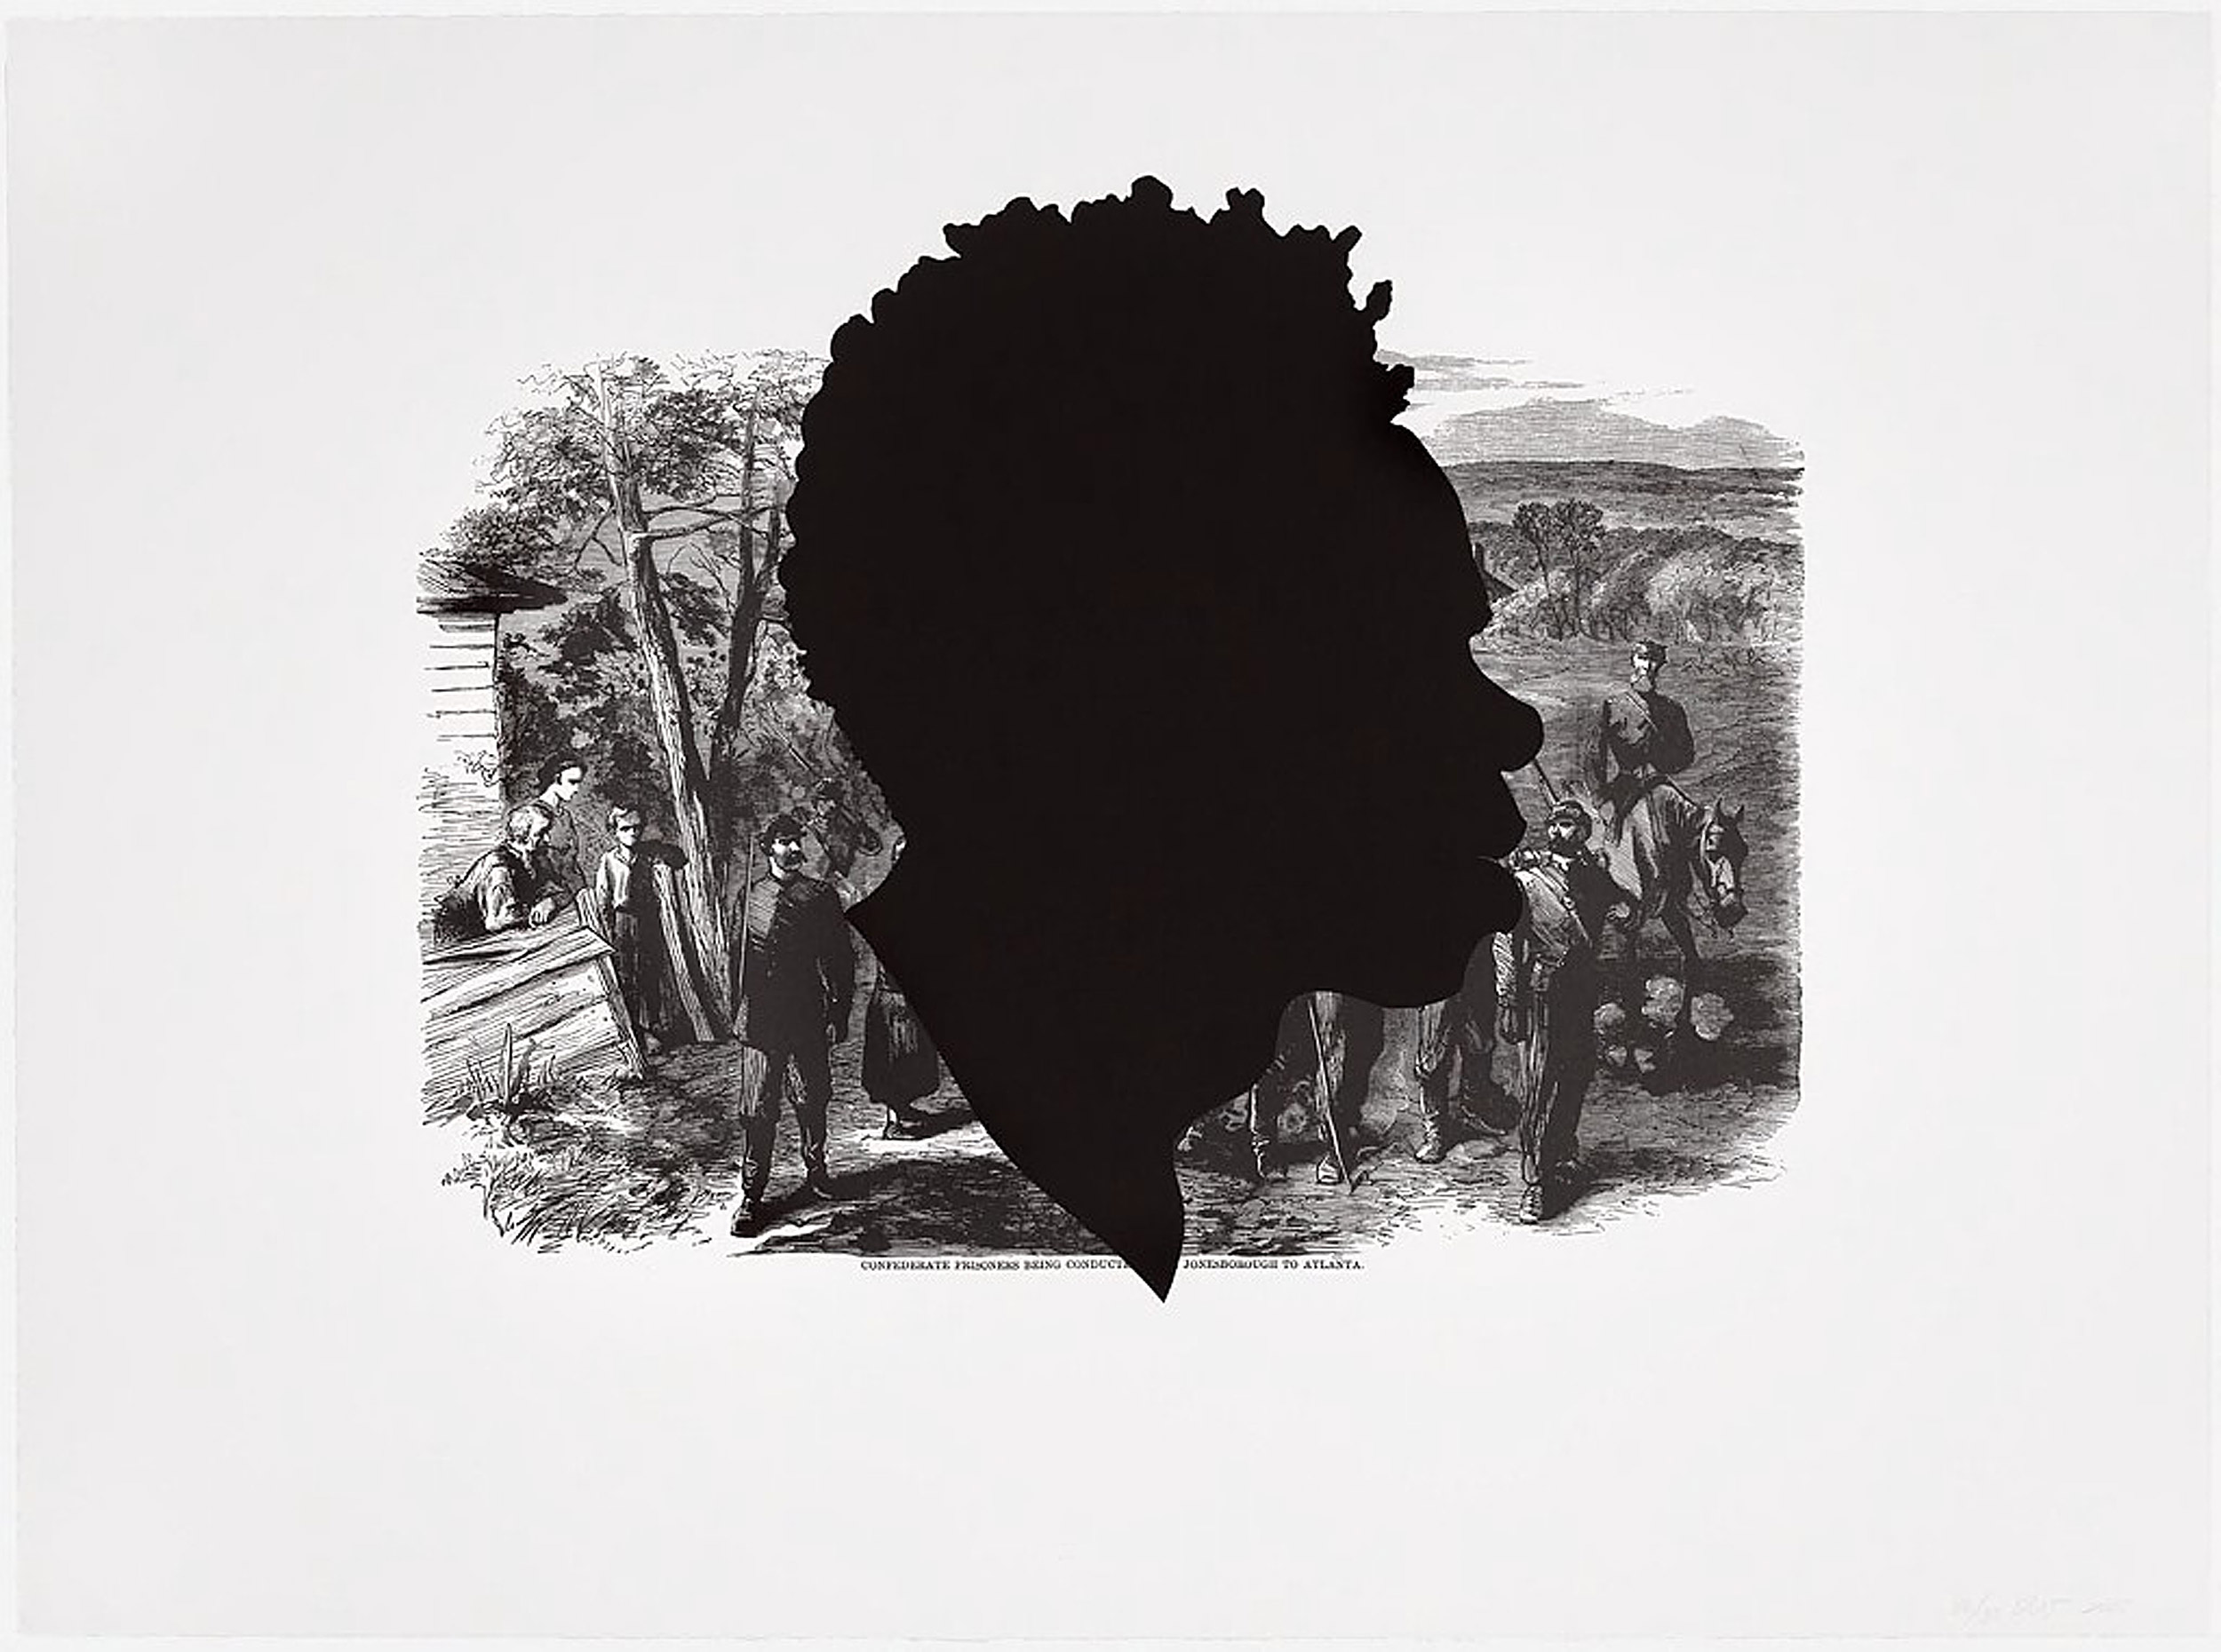 "Confederate Prisoners being Conducted from Jonesborough to Atlanta," offset lithograph and screenprint by Kara Walker.